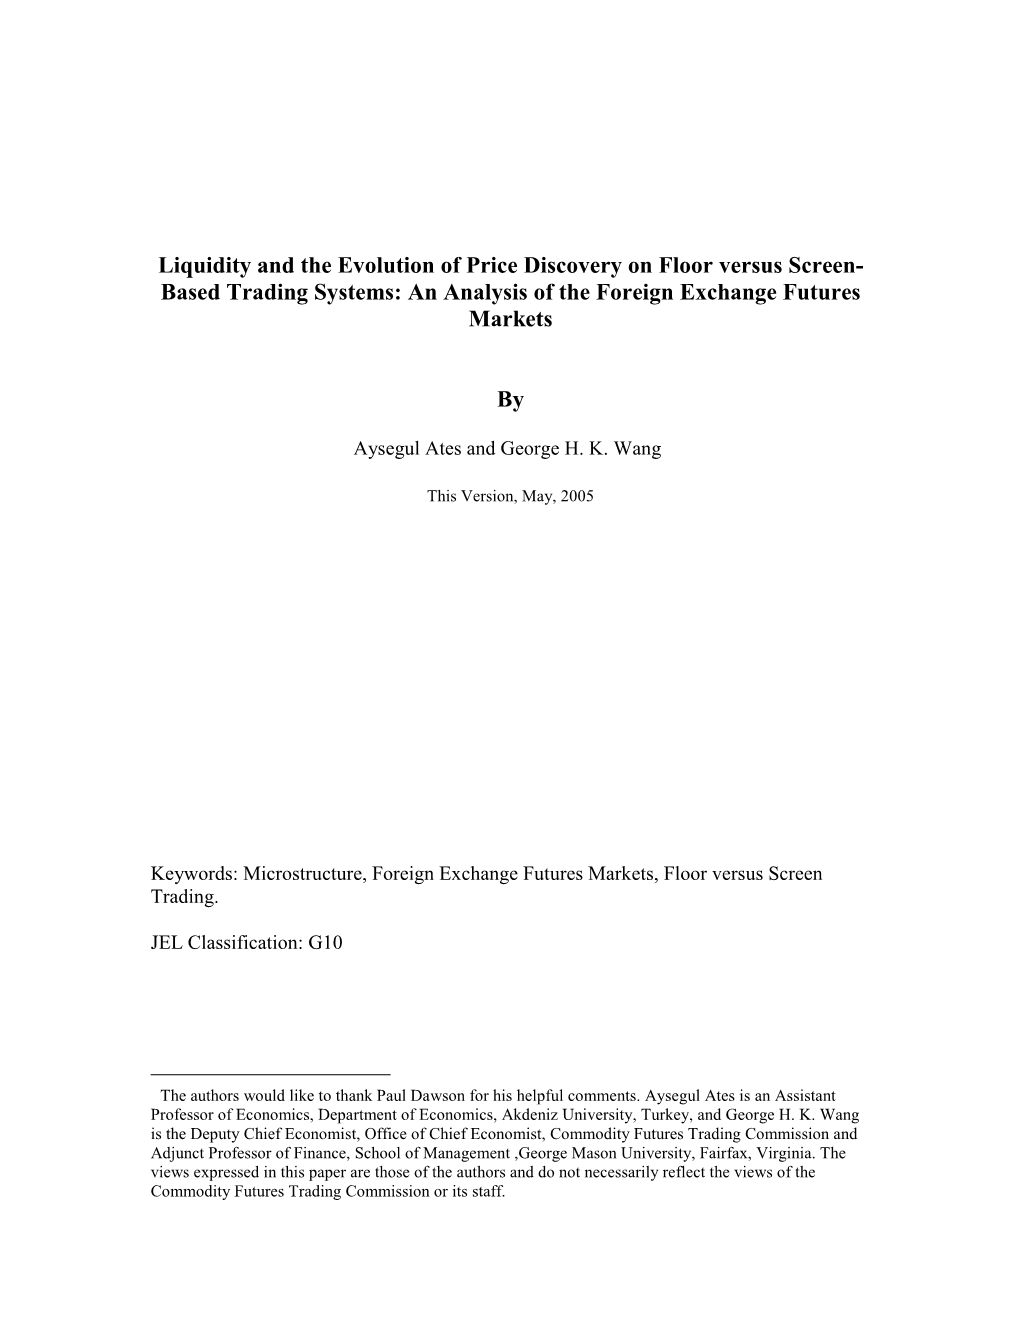 Liquidity and the Evolution of Price Discovery on Floor Versus Screen- Based Trading Systems: an Analysis of the Foreign Exchange Futures Markets